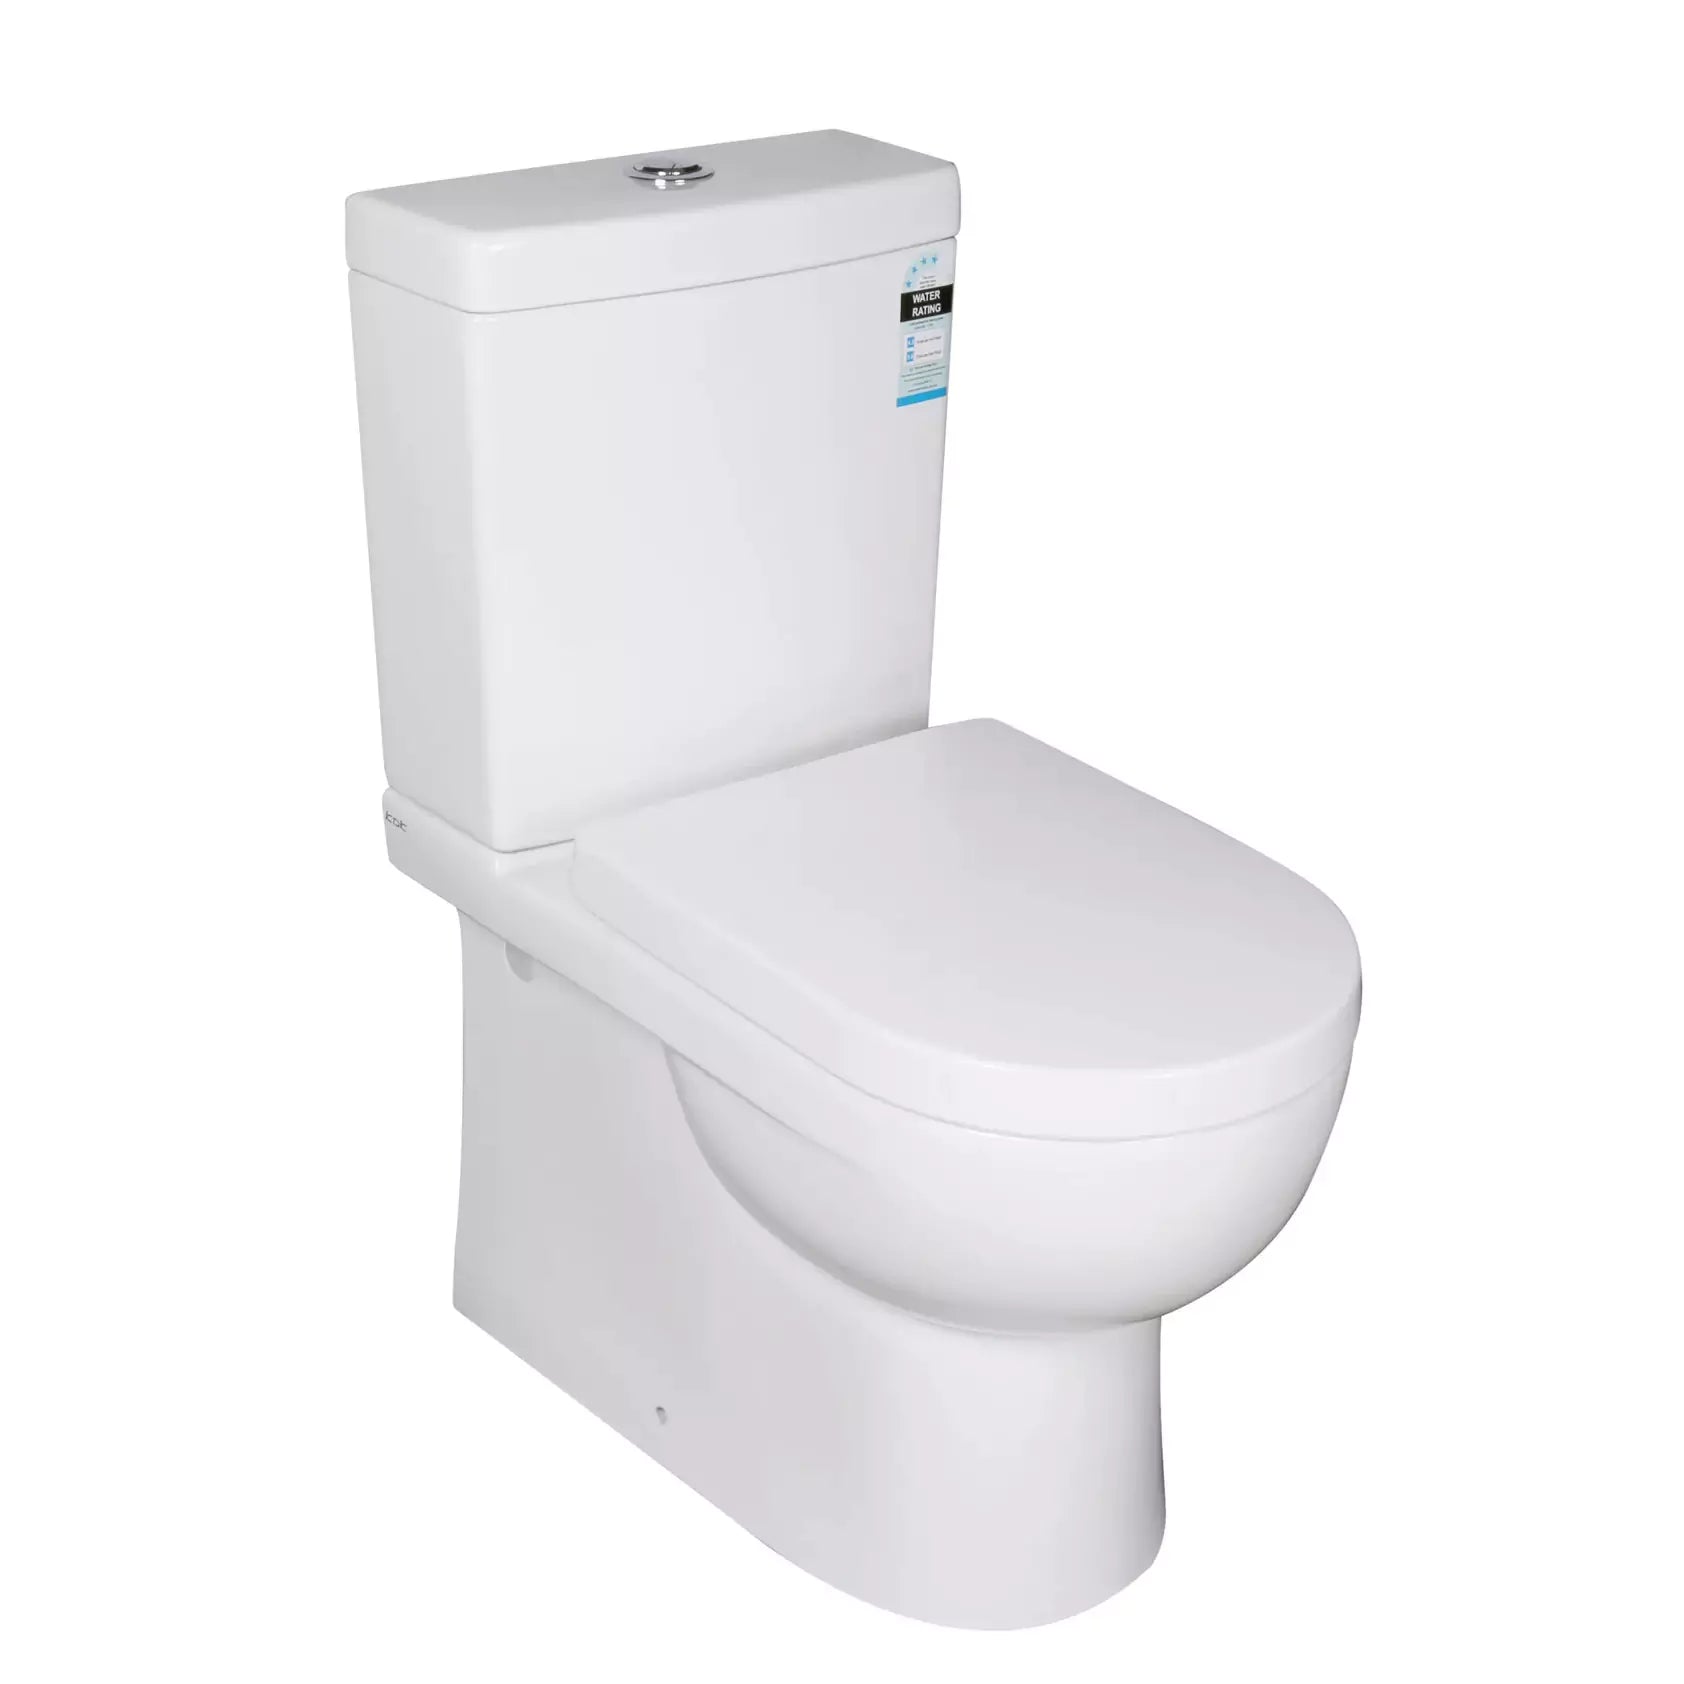 Rio Back To Wall Toilet Suite: Glossy white Toilet with Modern Design-Gloss-White-KDK013C/KDK013P